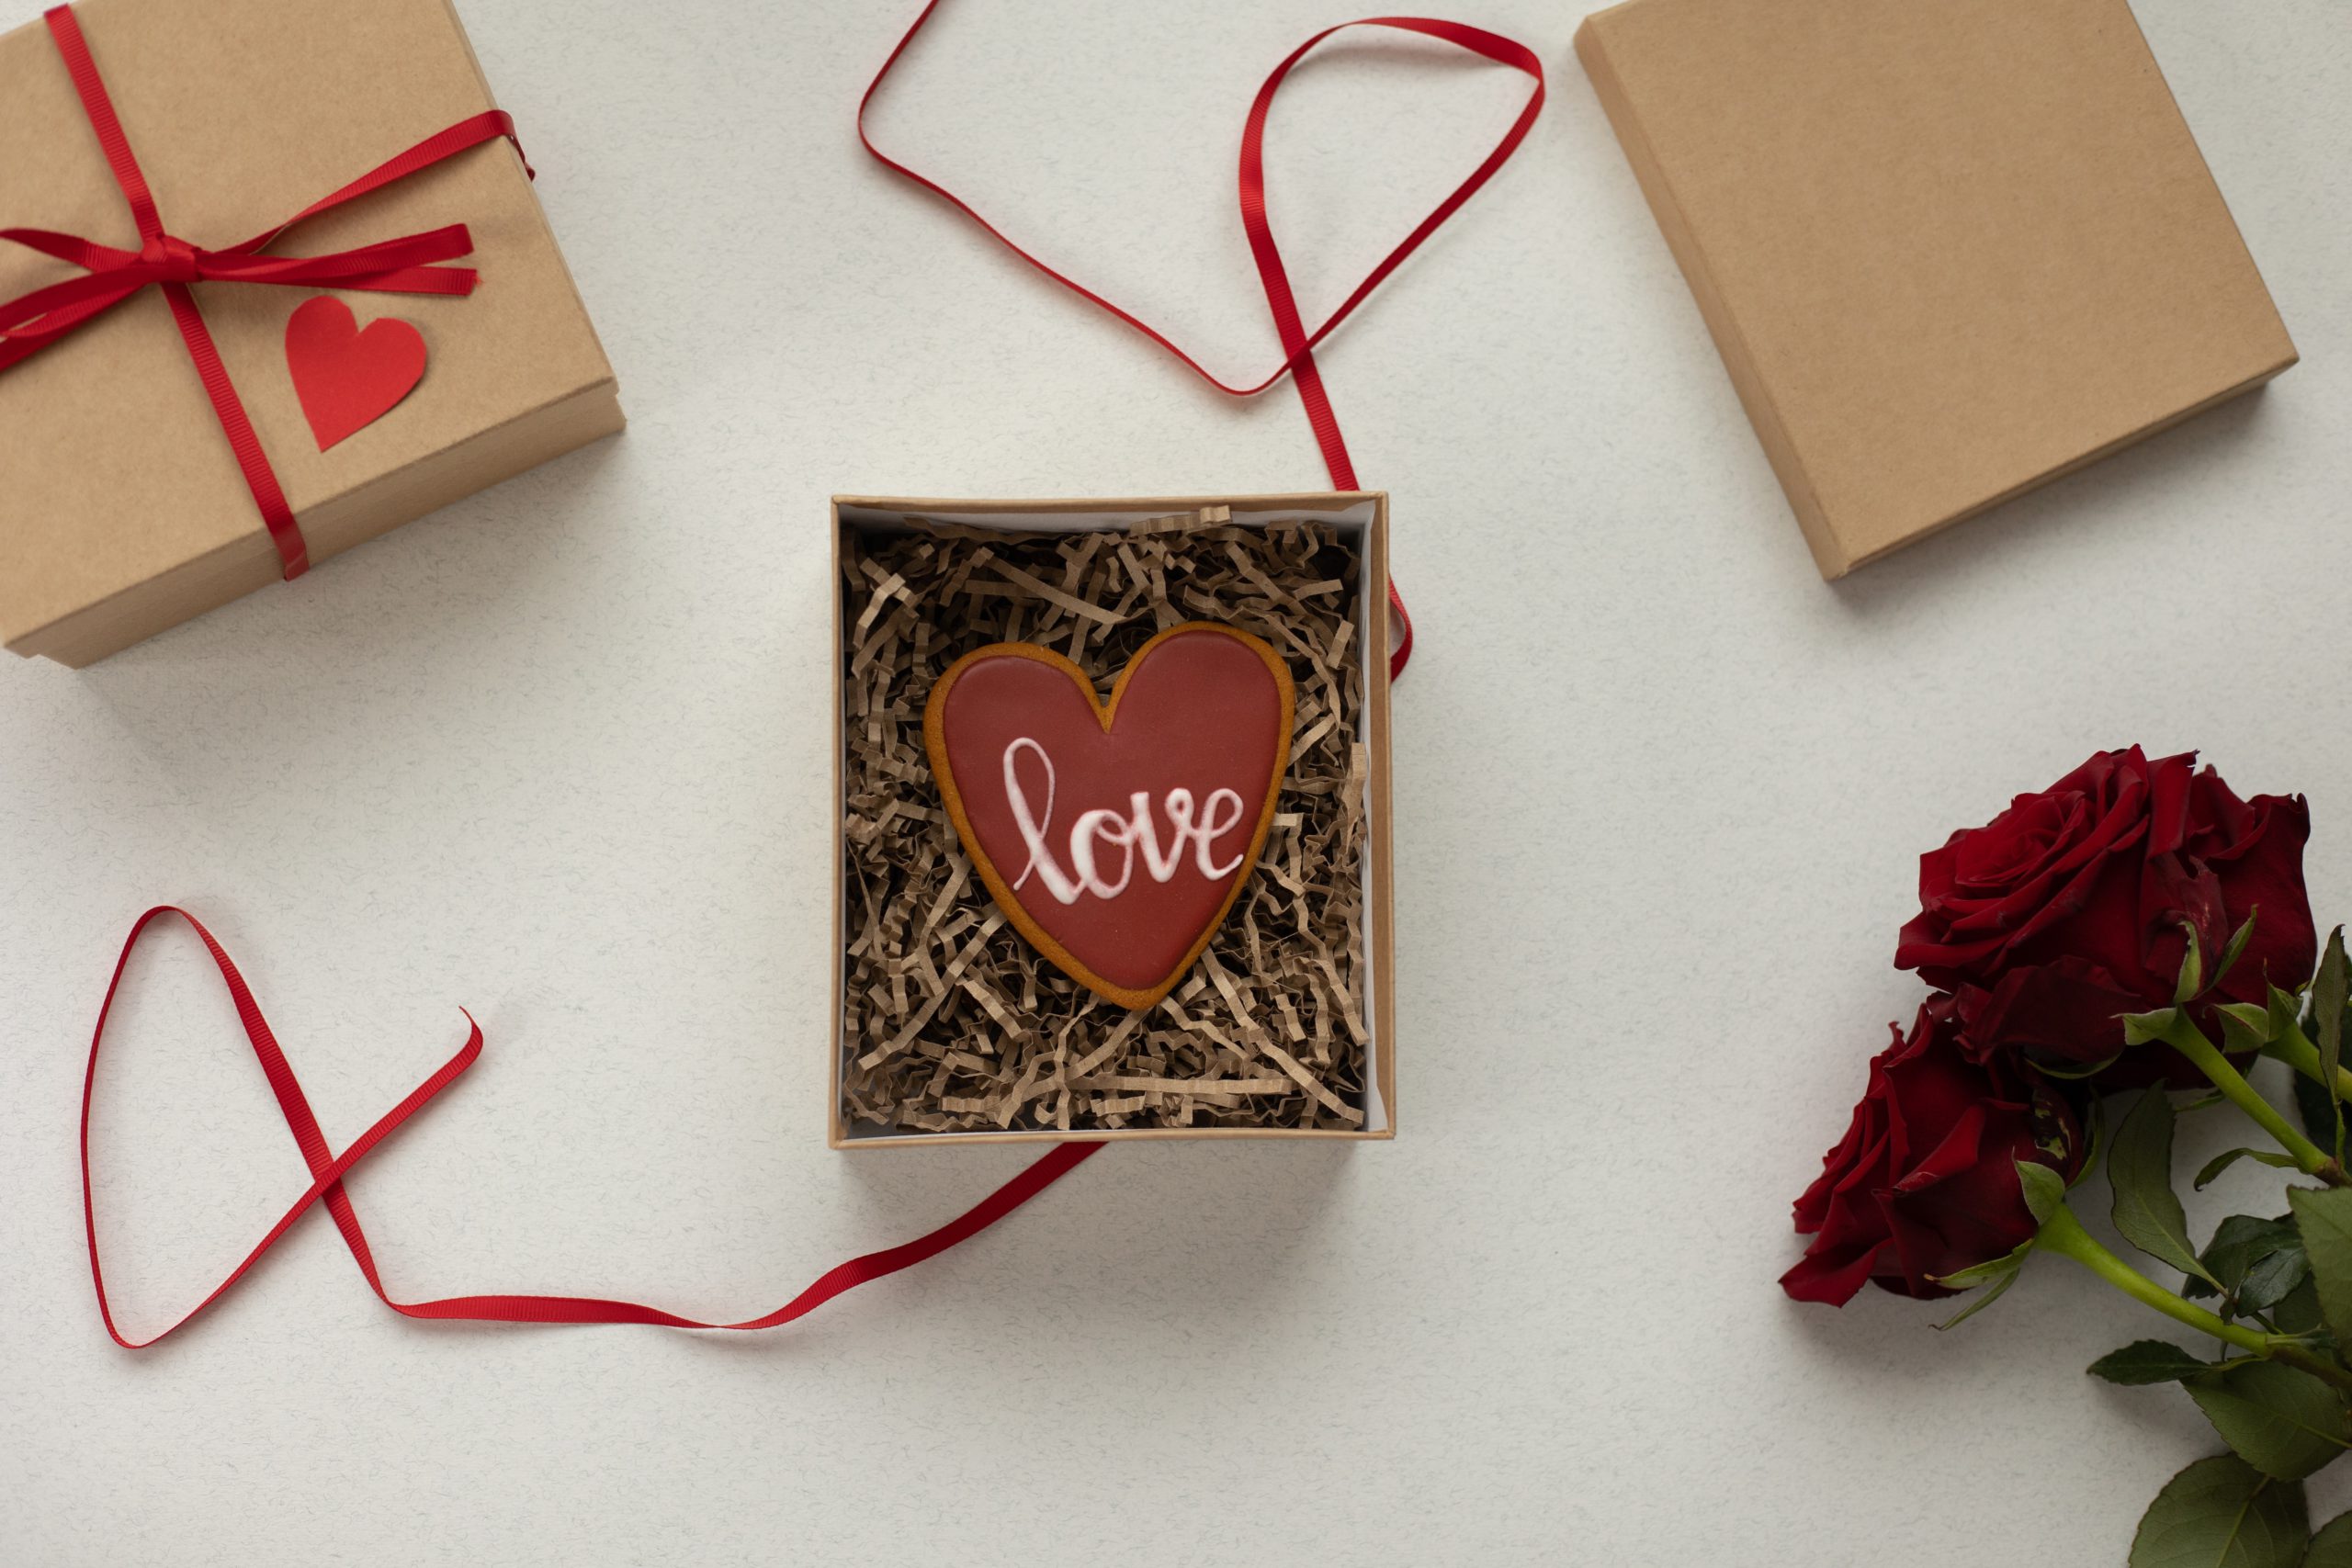 How to Pick the Best Valentine’s Day Gifts For Friends